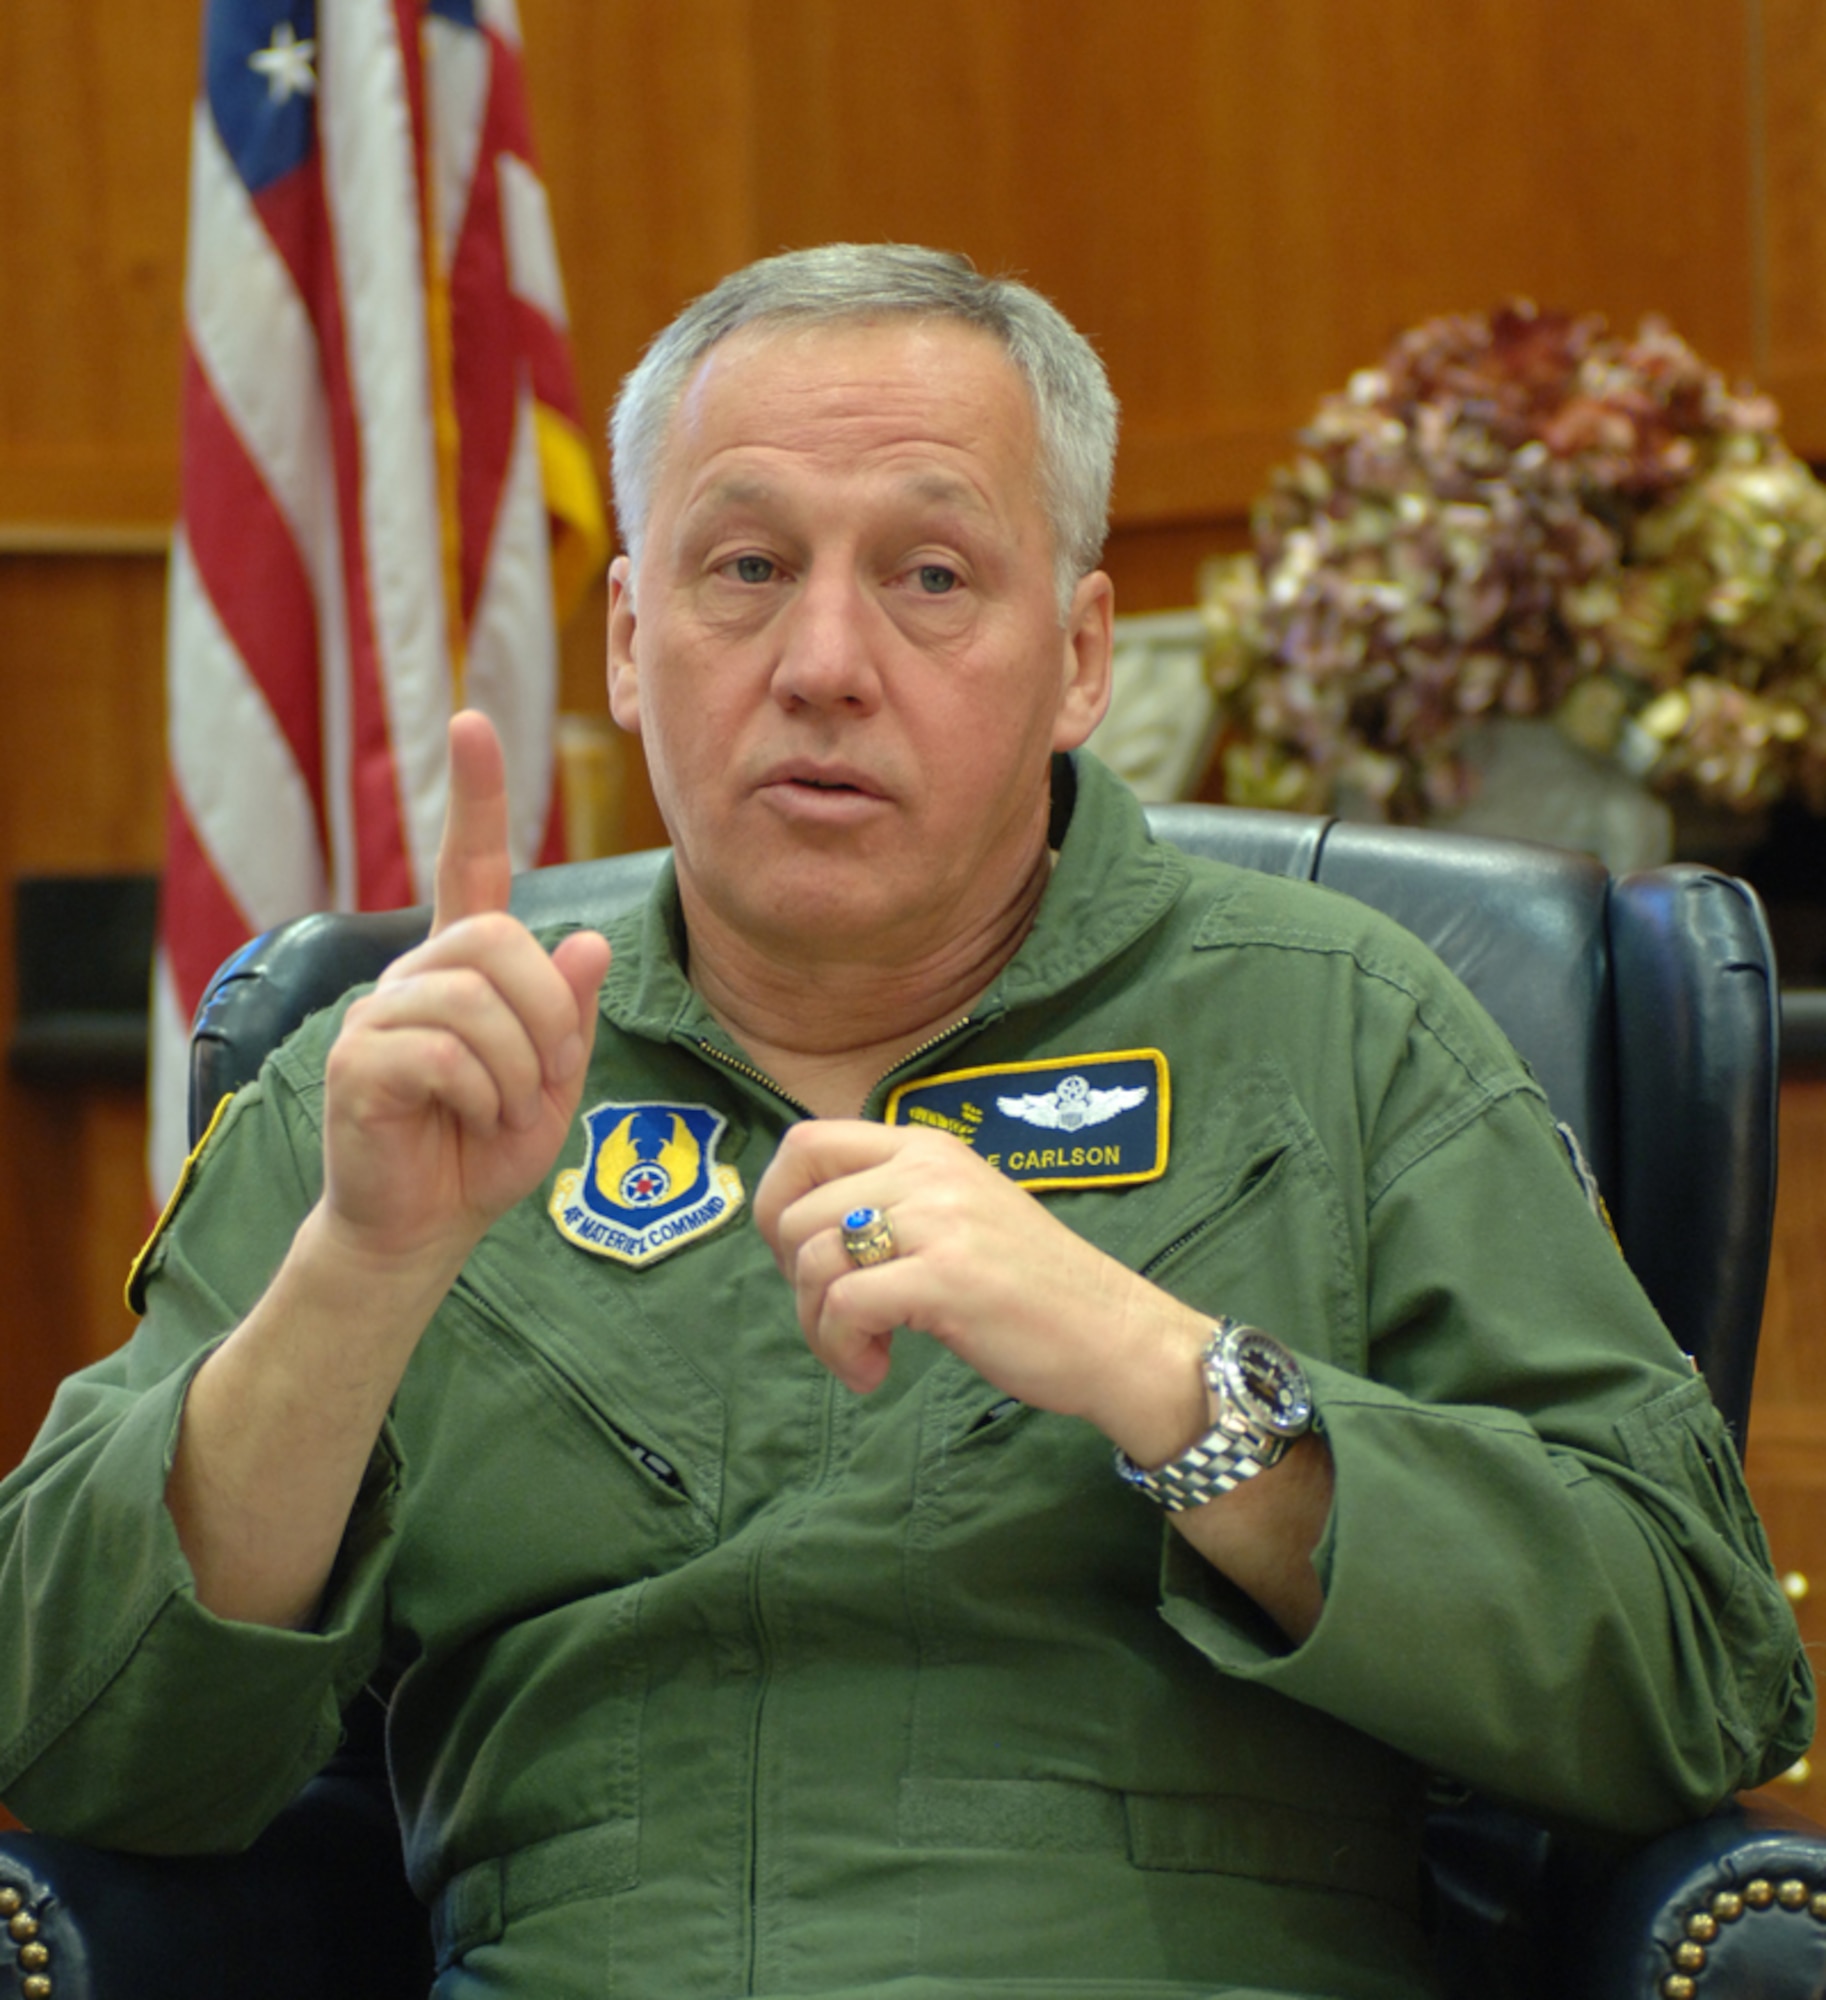 Gen. Bruce Carlson, commander of Air Force Materiel Command, says he will work to “reinvigorate” the acquisition process and to focus on development, acquisition and sustainment programs that will follow the lifespan of Air Force airframes from cradle to grave. (Air Force photo)